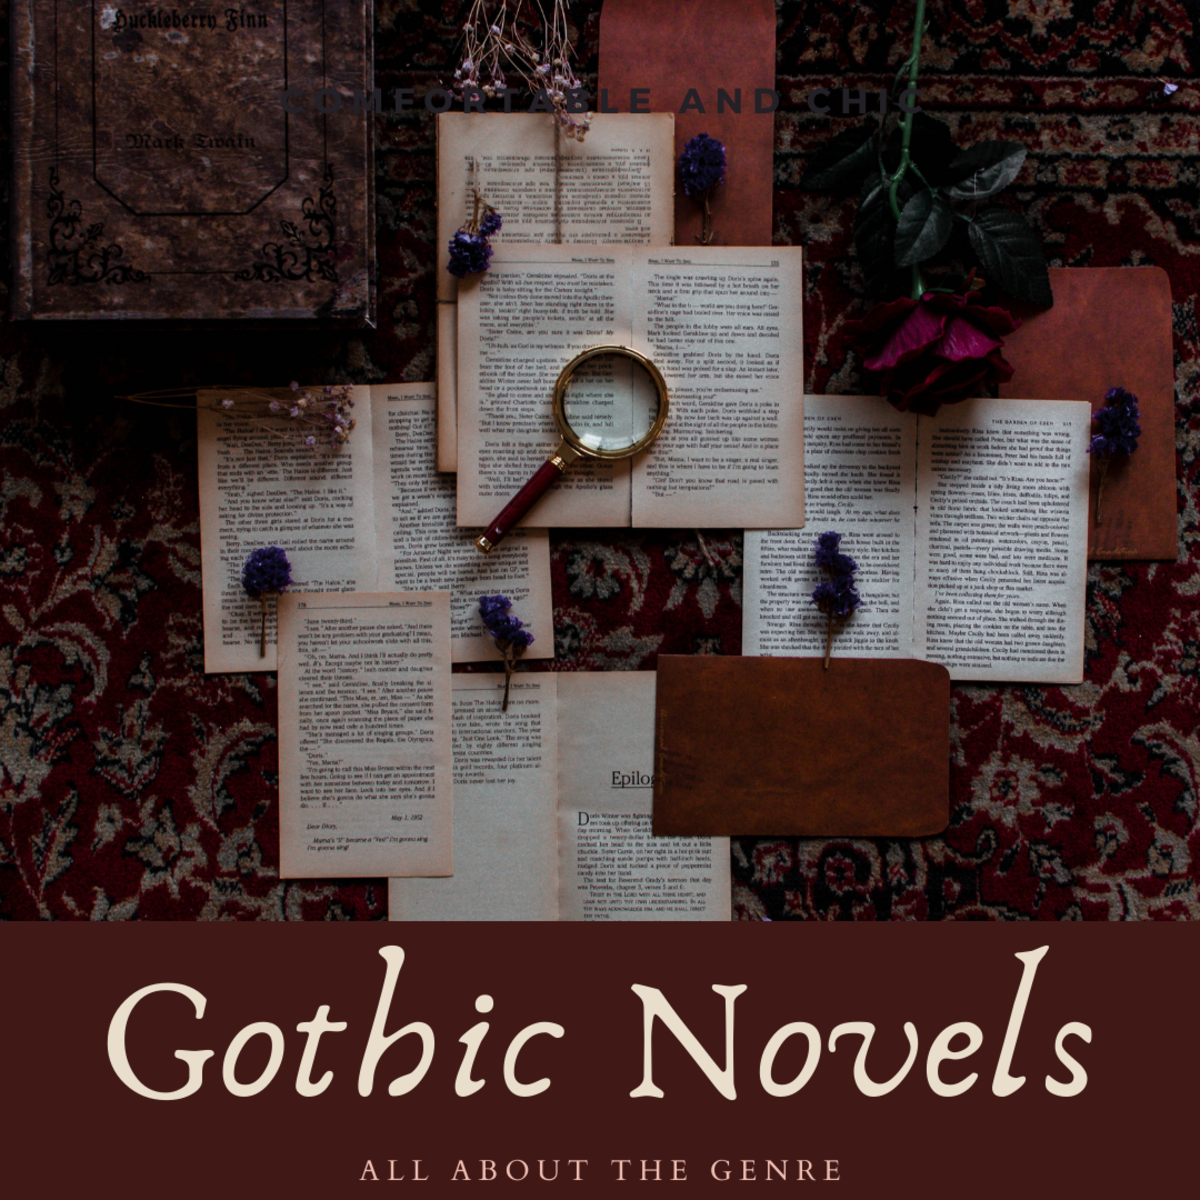 Learn what the gothic novel is about and find examples of the genre.